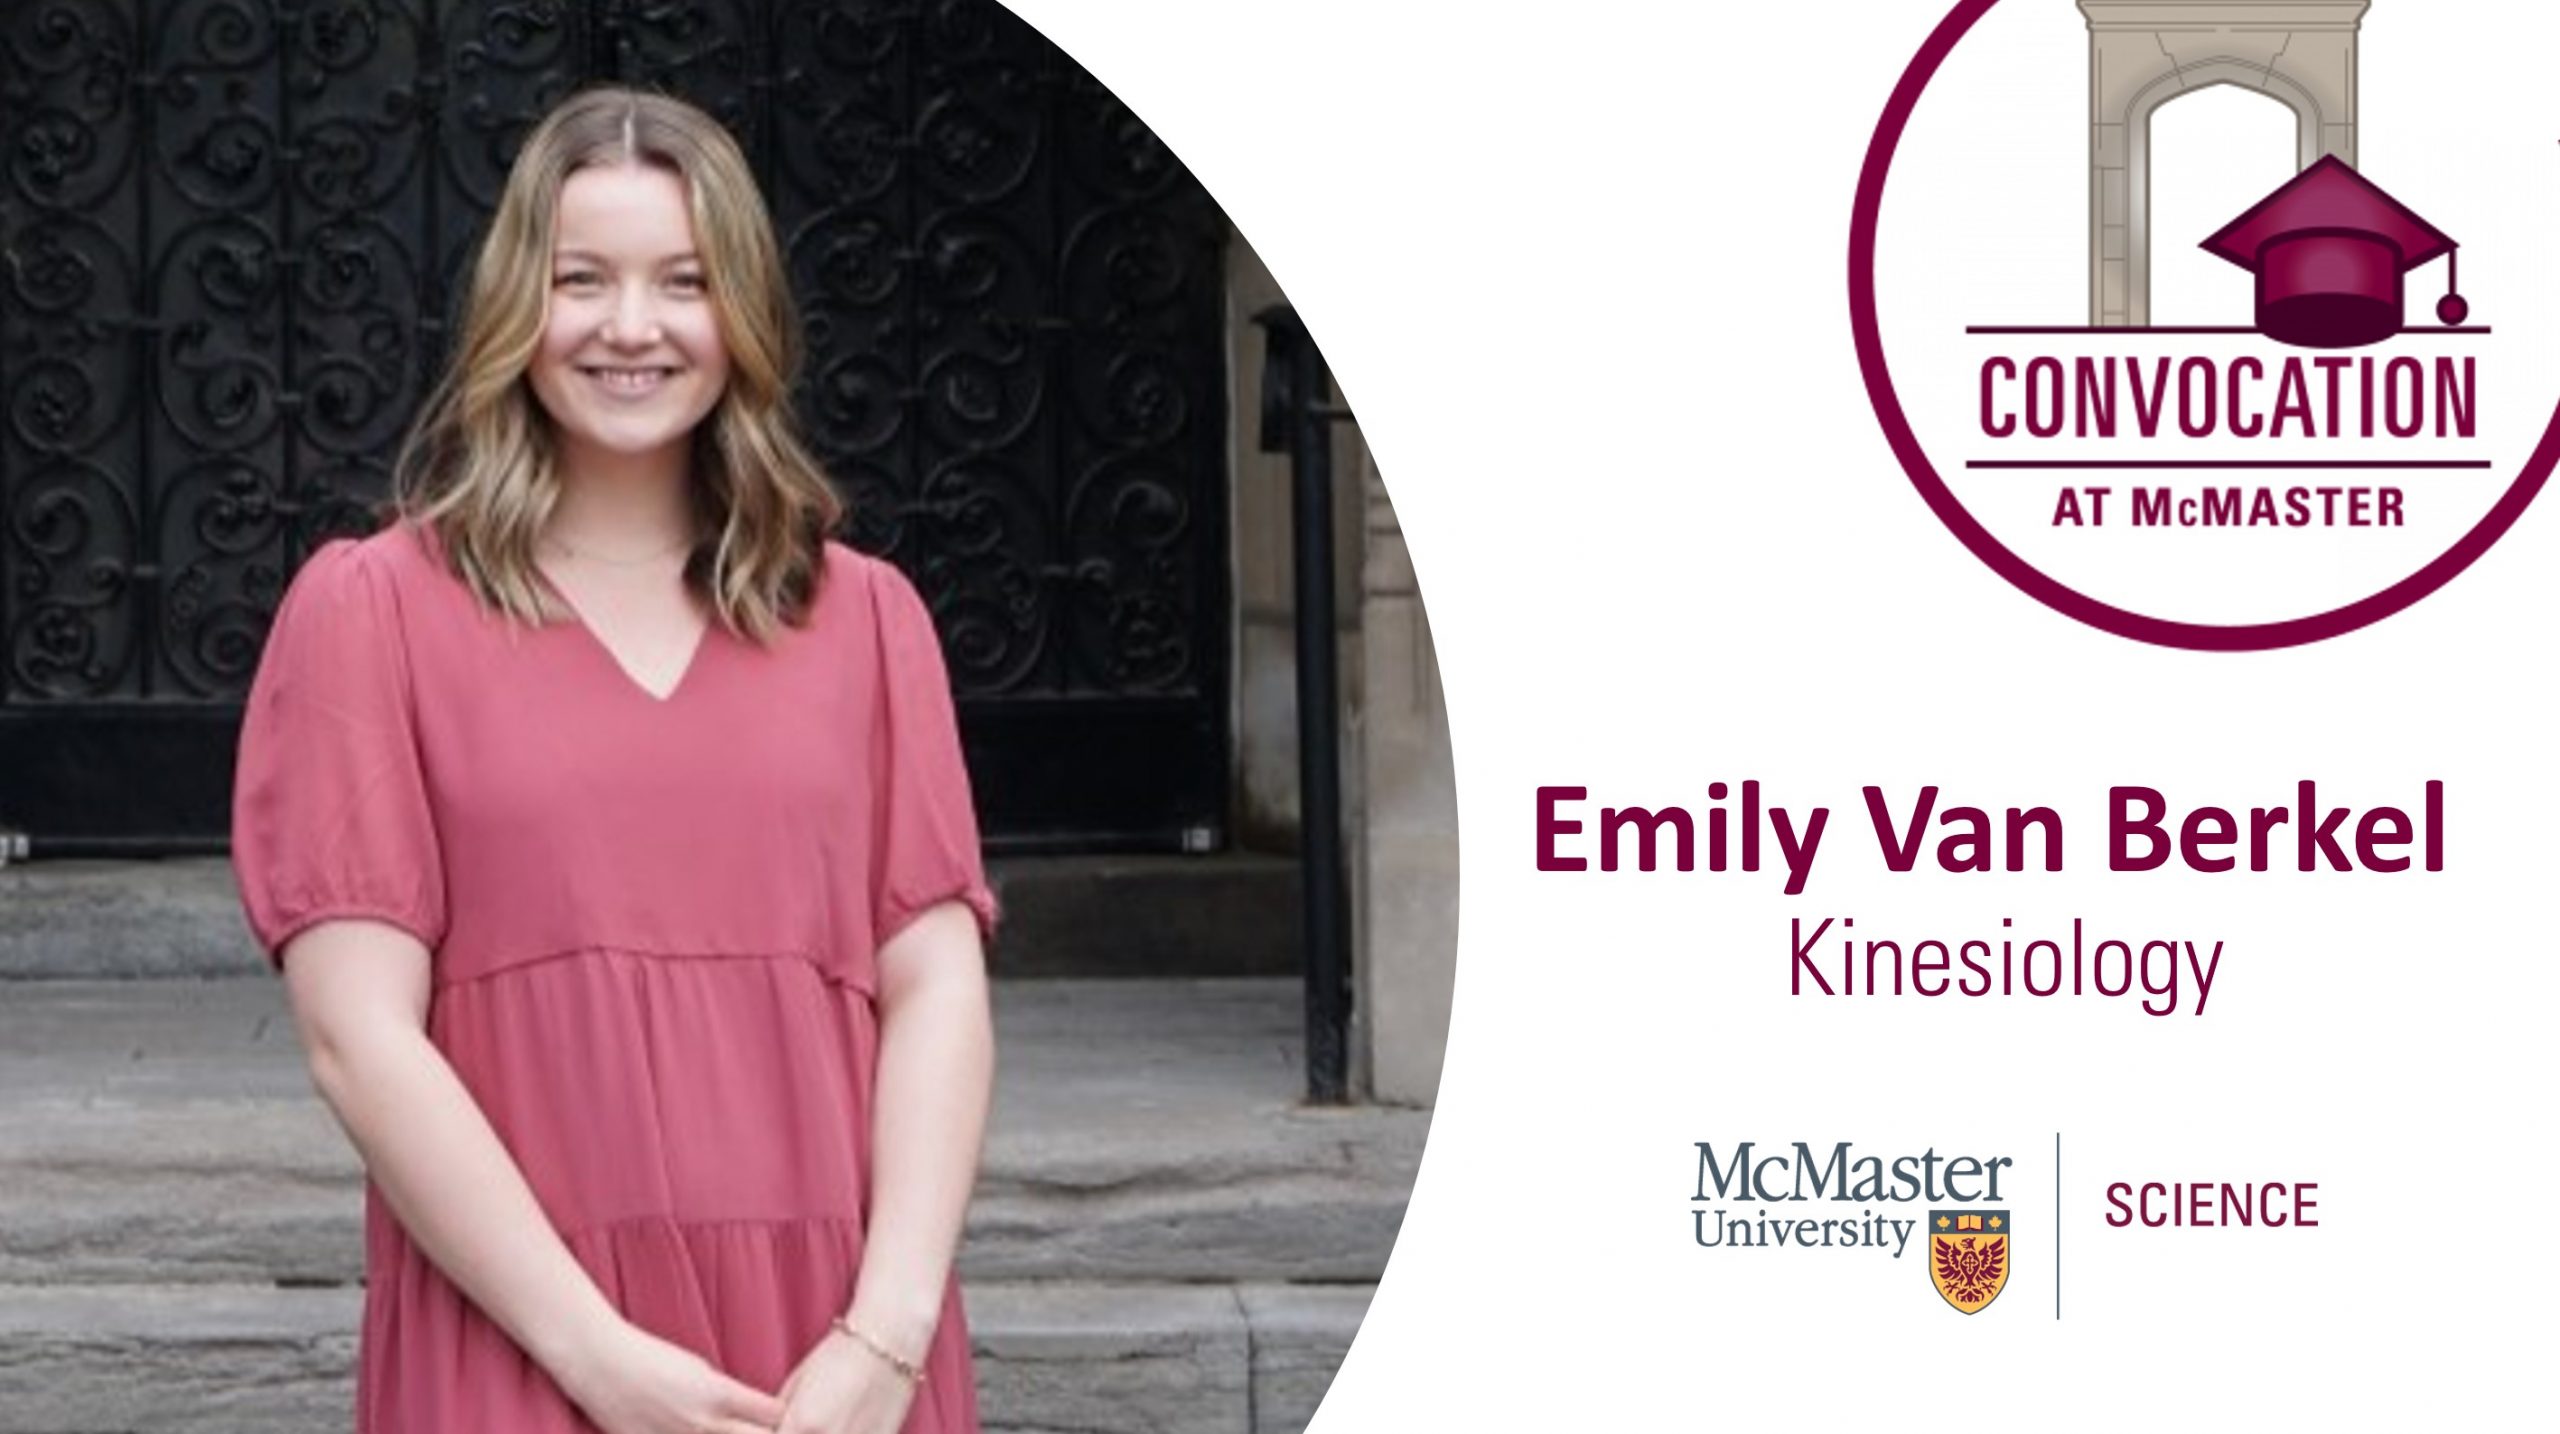 Portrait of Emily Van Berkel with the convocation logo and mcmaster science logo